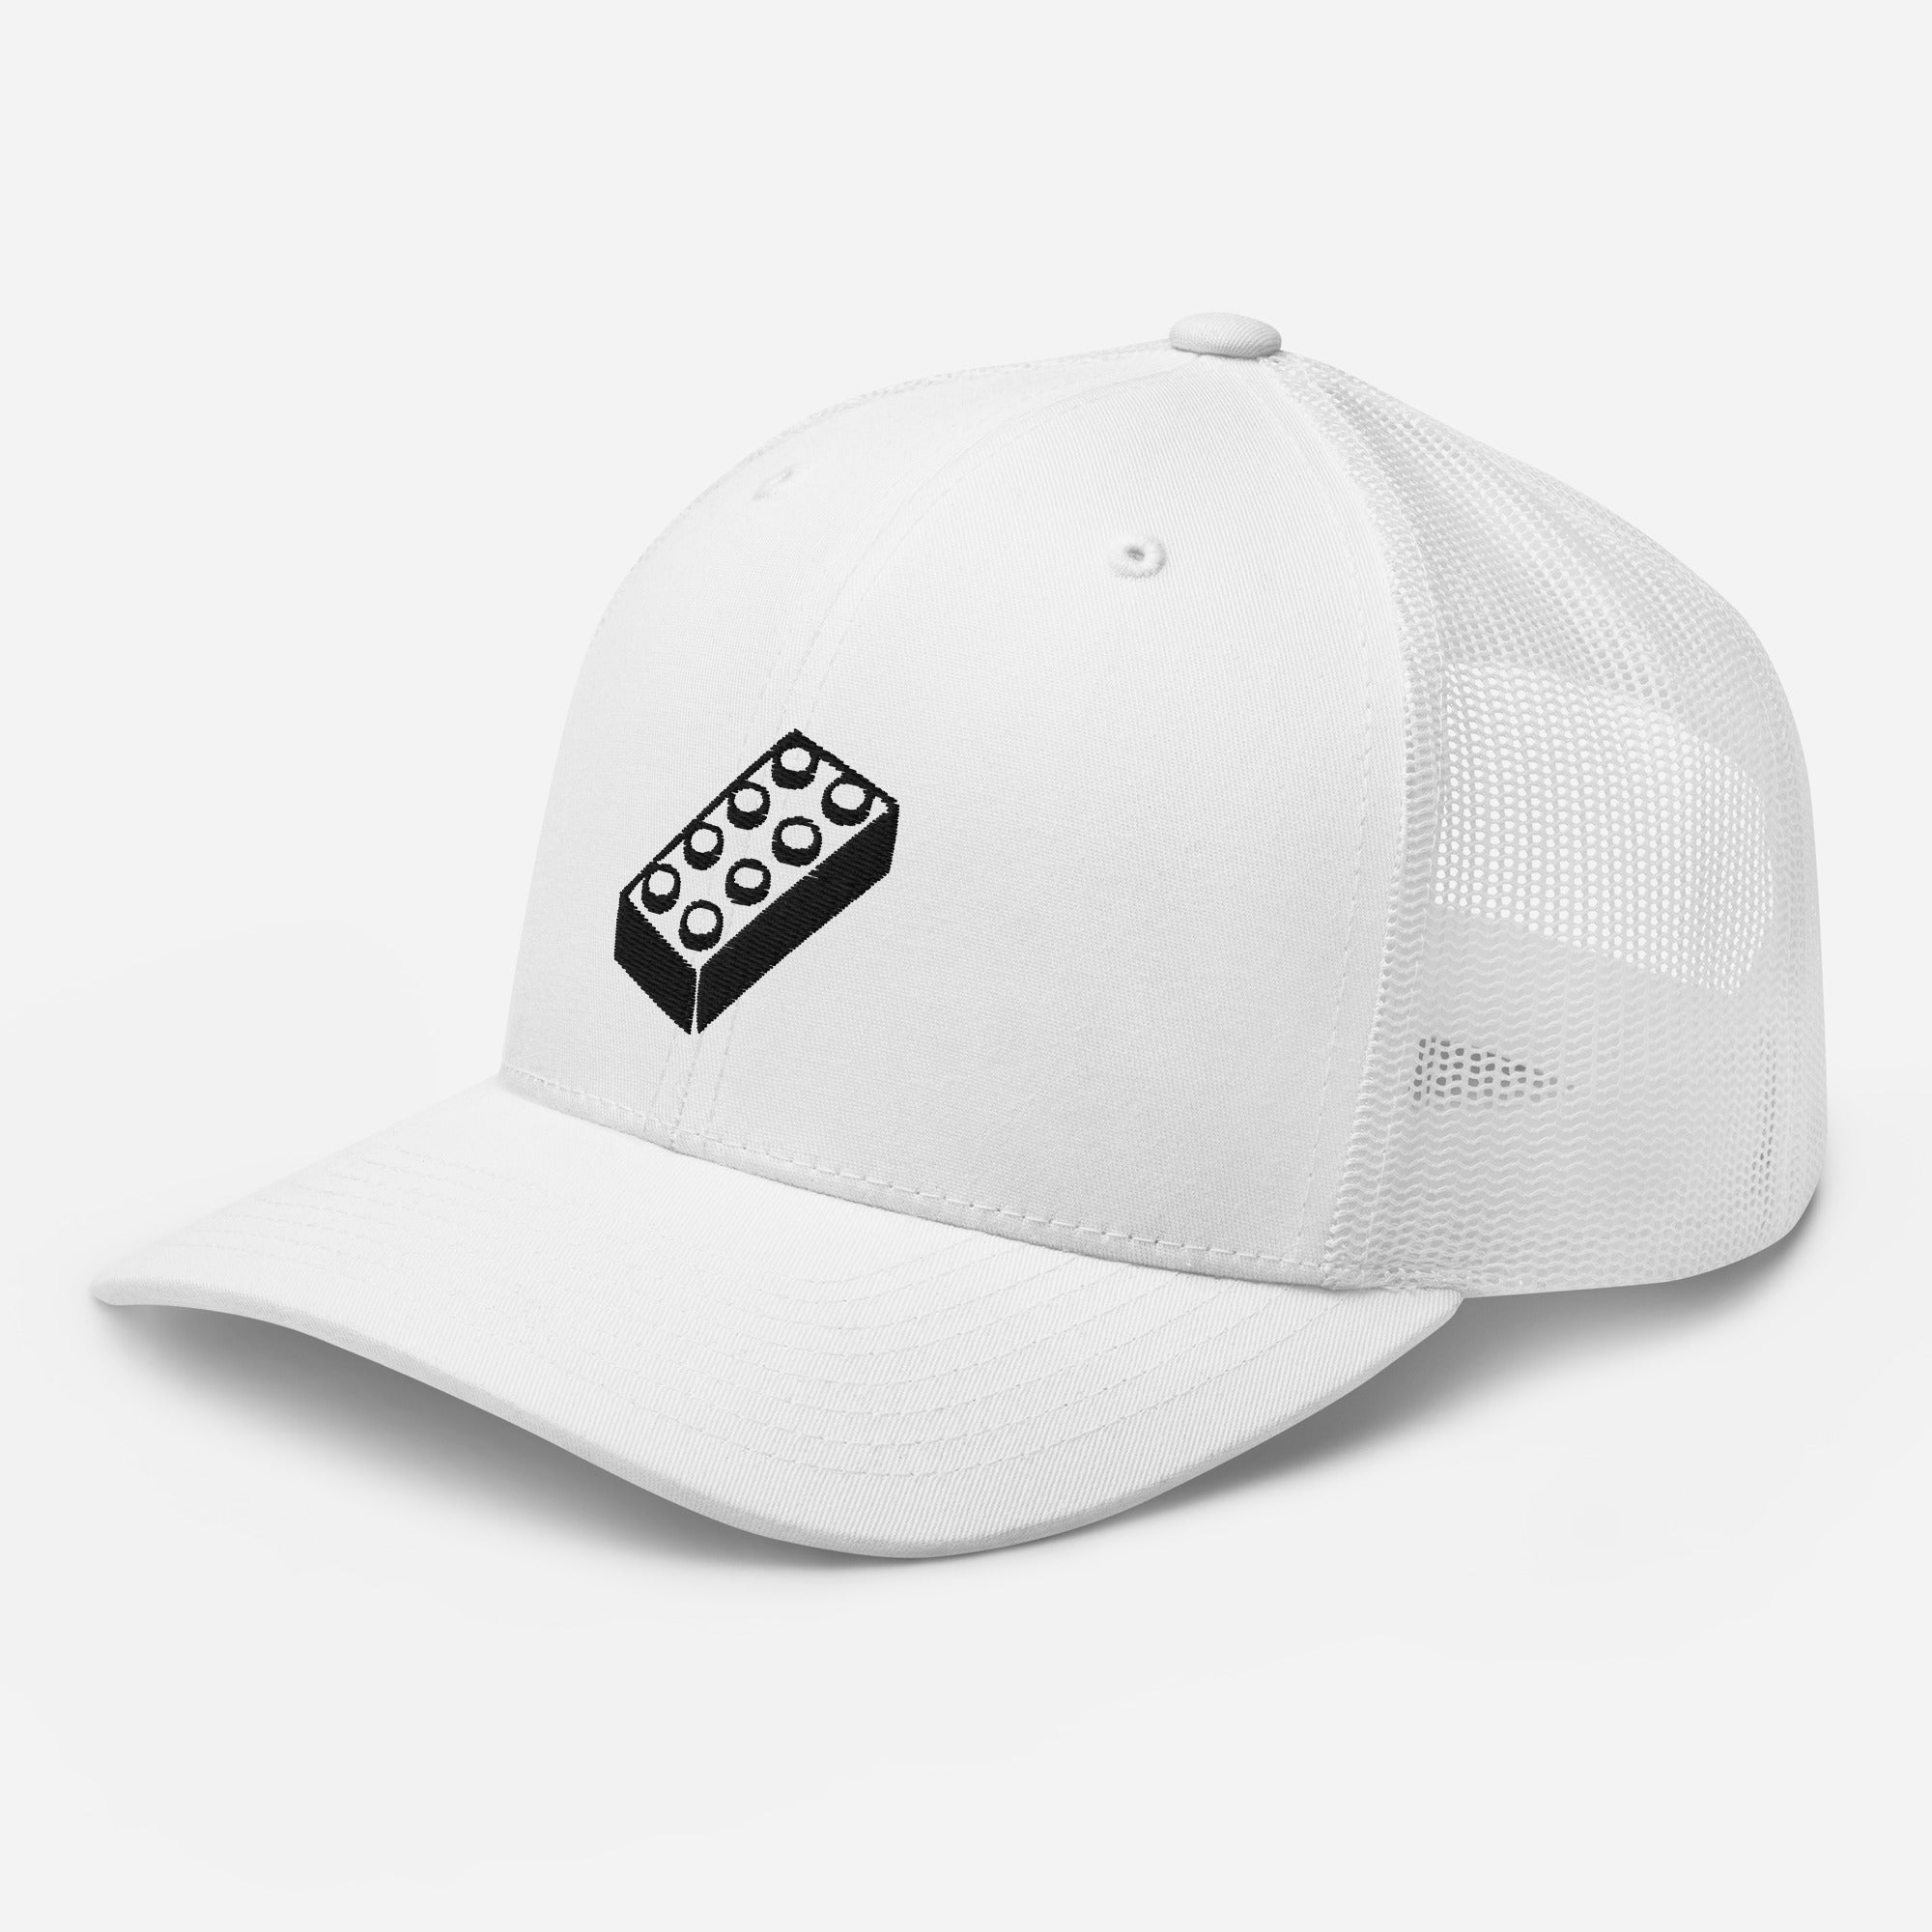 a white trucker cap with a lego embroidered brick design